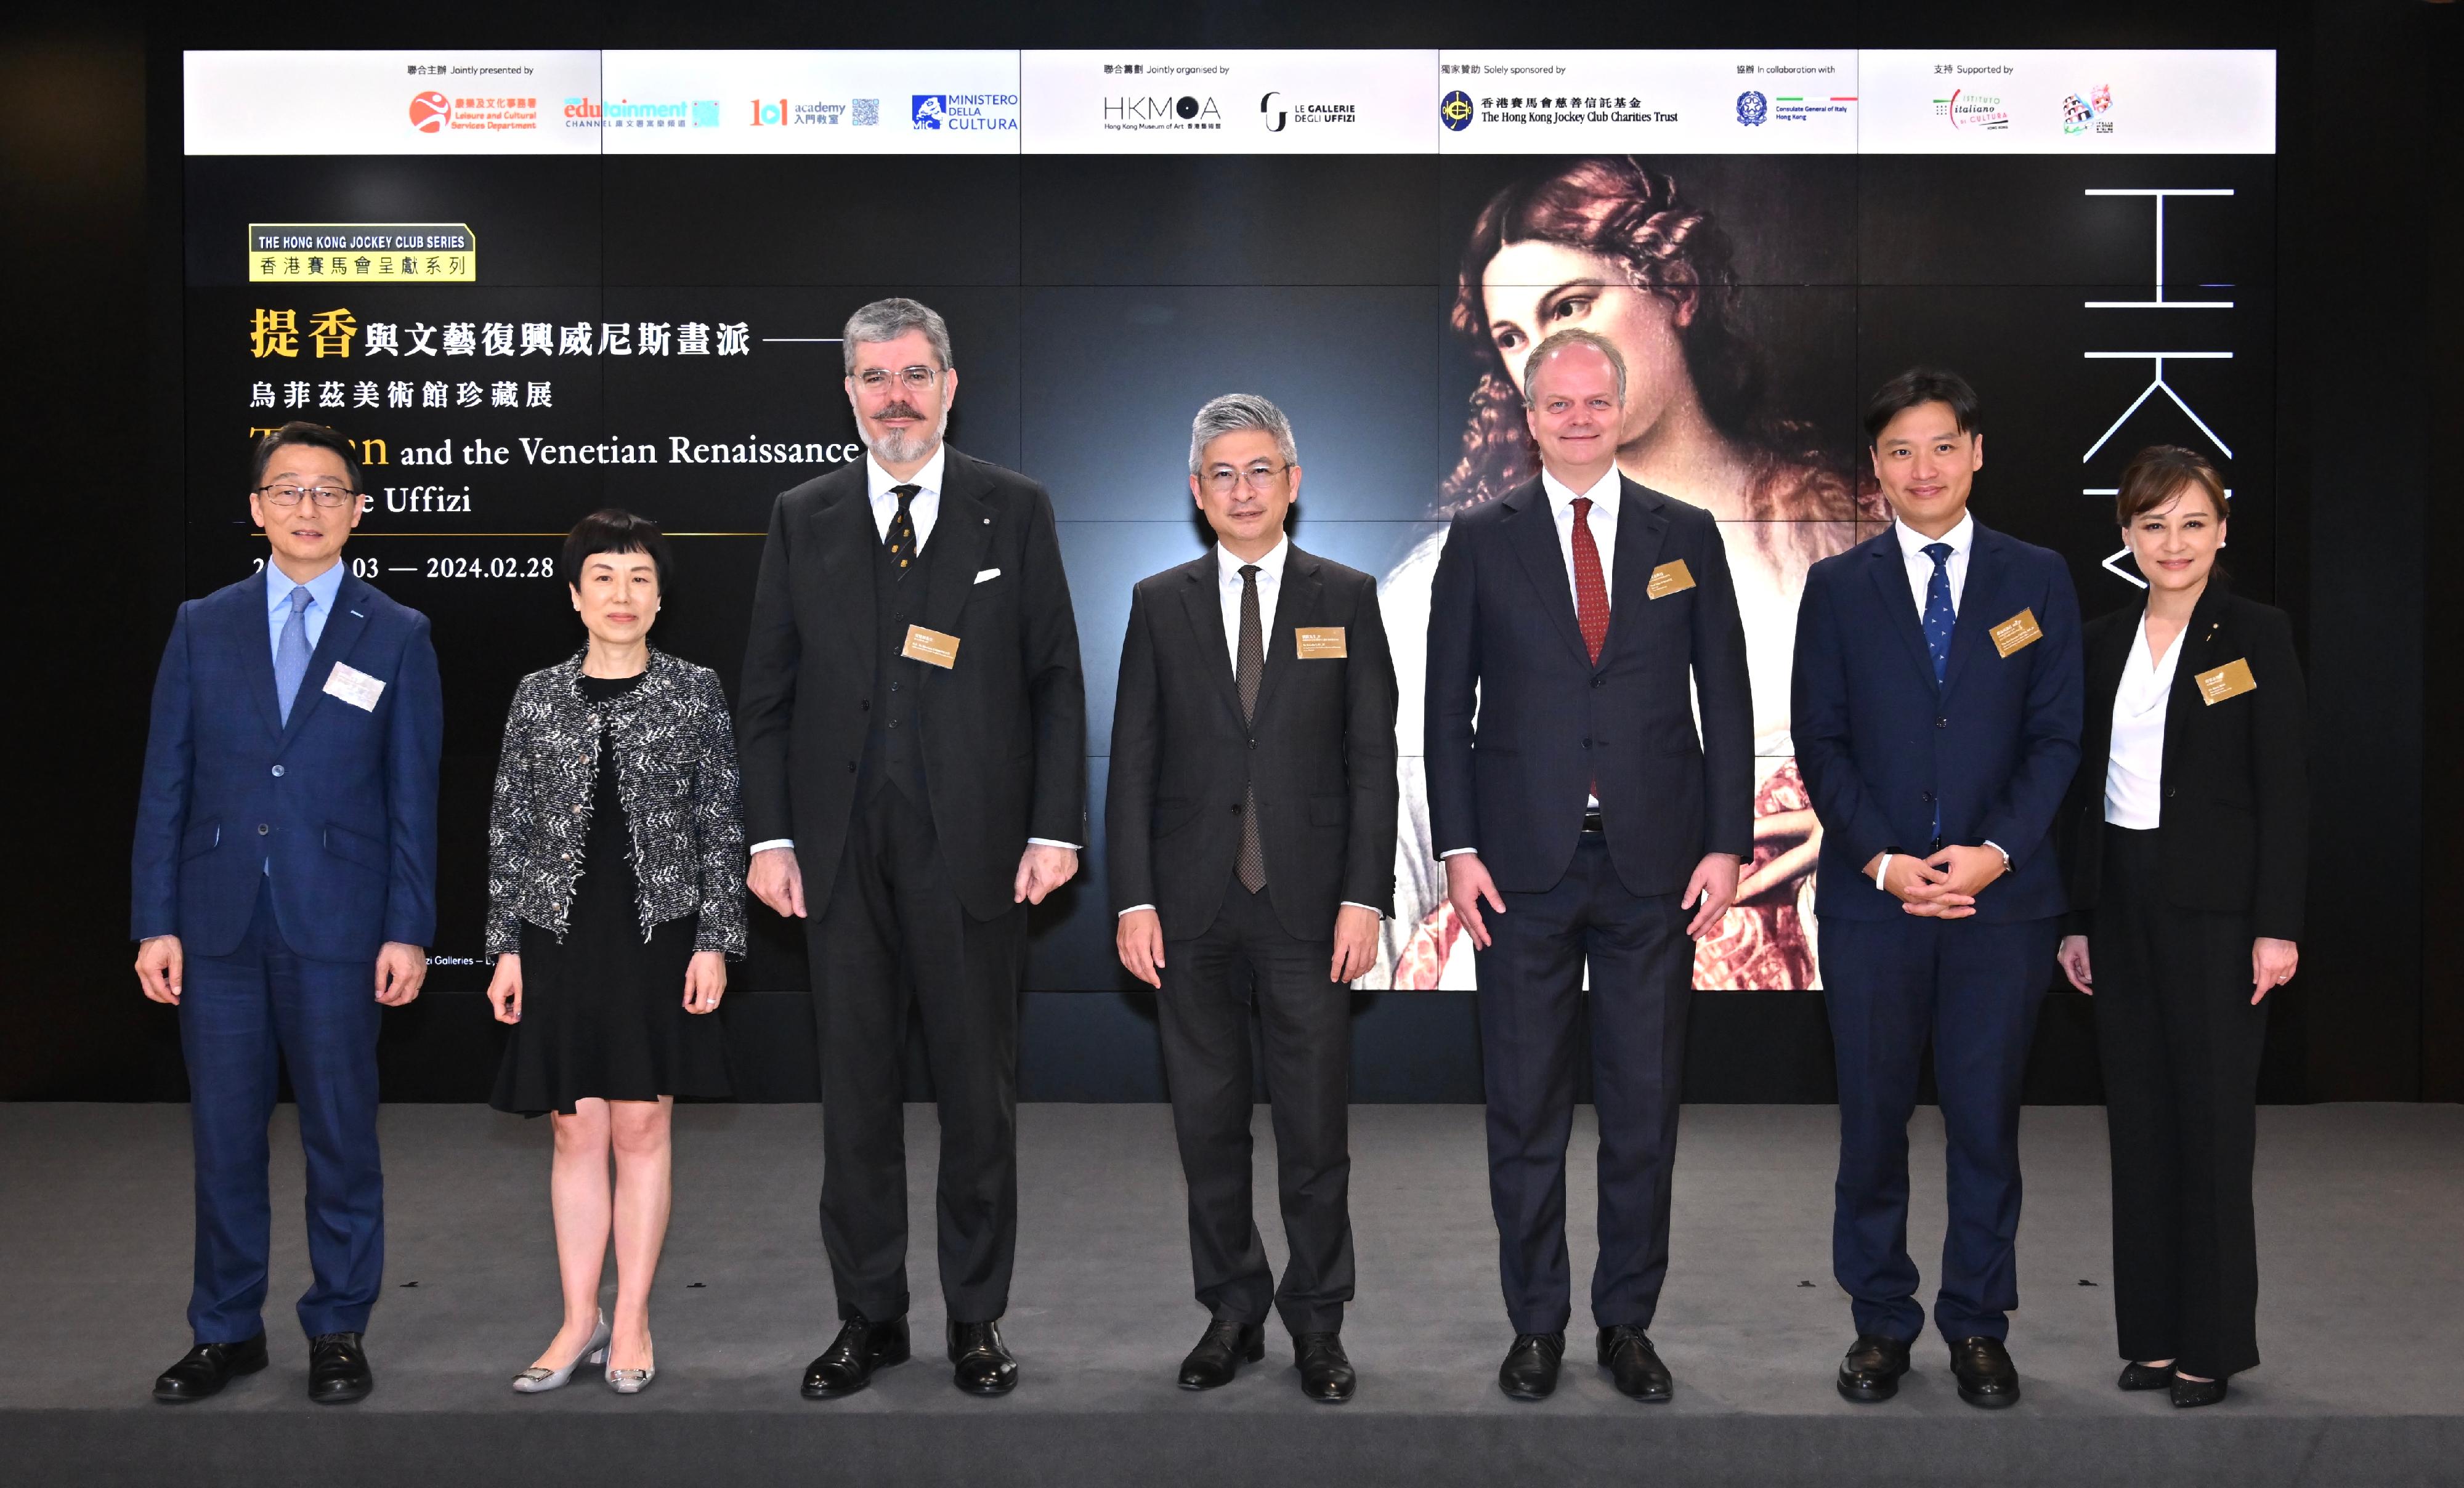 The opening ceremony of "The Hong Kong Jockey Club Series: Titian and the Venetian Renaissance from the Uffizi" exhibition was held at the Hong Kong Museum of Art (HKMoA) yesterday (November 2). The officiating guests included (from left) the Director of Leisure and Cultural Services, Mr Vincent Liu; the Executive Manager, Charities (Sports, Culture & Community Engagement) of the Hong Kong Jockey Club, Ms Winnie Yip; the Ambassador of Italy to the People's Republic of China, Mr Massimo Ambrosetti; the Acting Secretary for Culture, Sports and Tourism, Mr Raistlin Lau; the Director of the Uffizi Galleries in Italy, Professor Eike Schmidt; the Chairman of the Legislative Council Panel on Home Affairs, Culture and Sports, Mr Vincent Cheng; and the Museum Director of the HKMoA, Dr Maria Mok. 